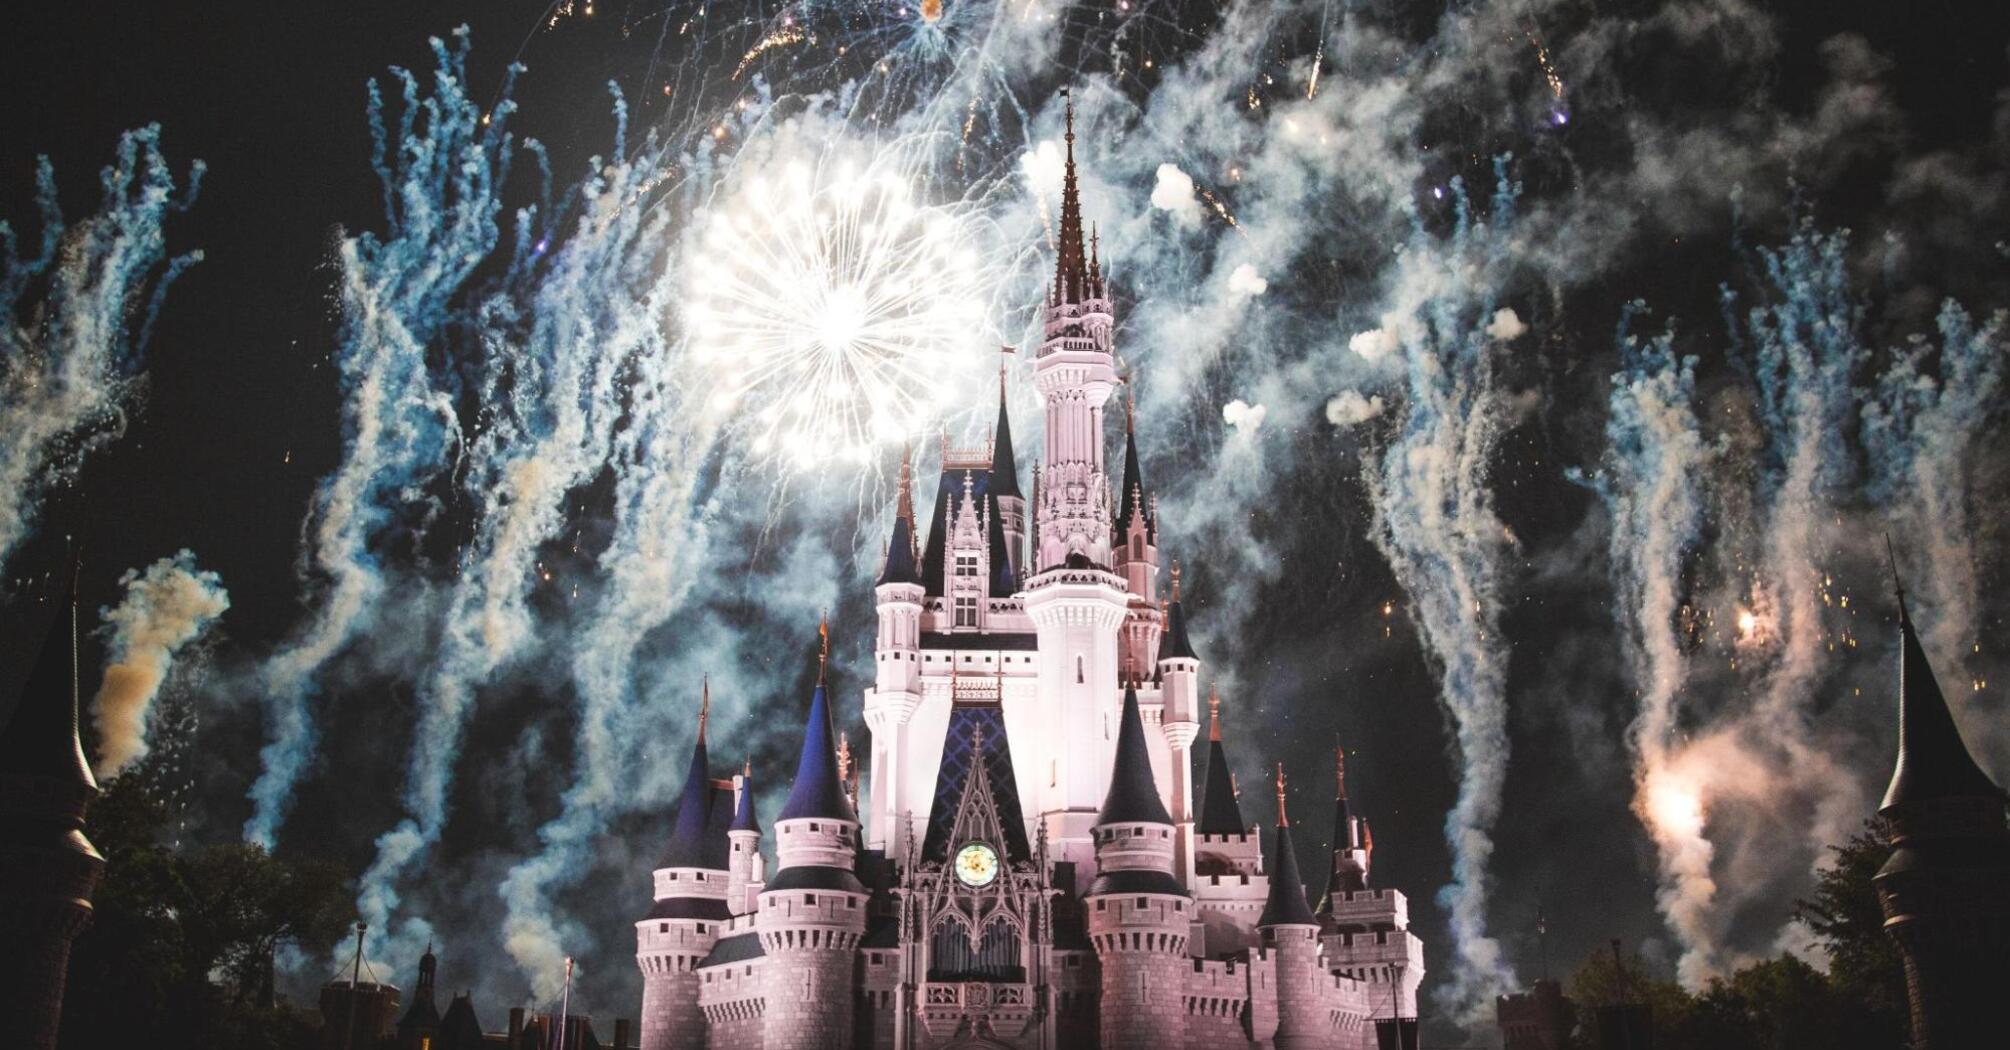 Disney castle surrounded by fireworks